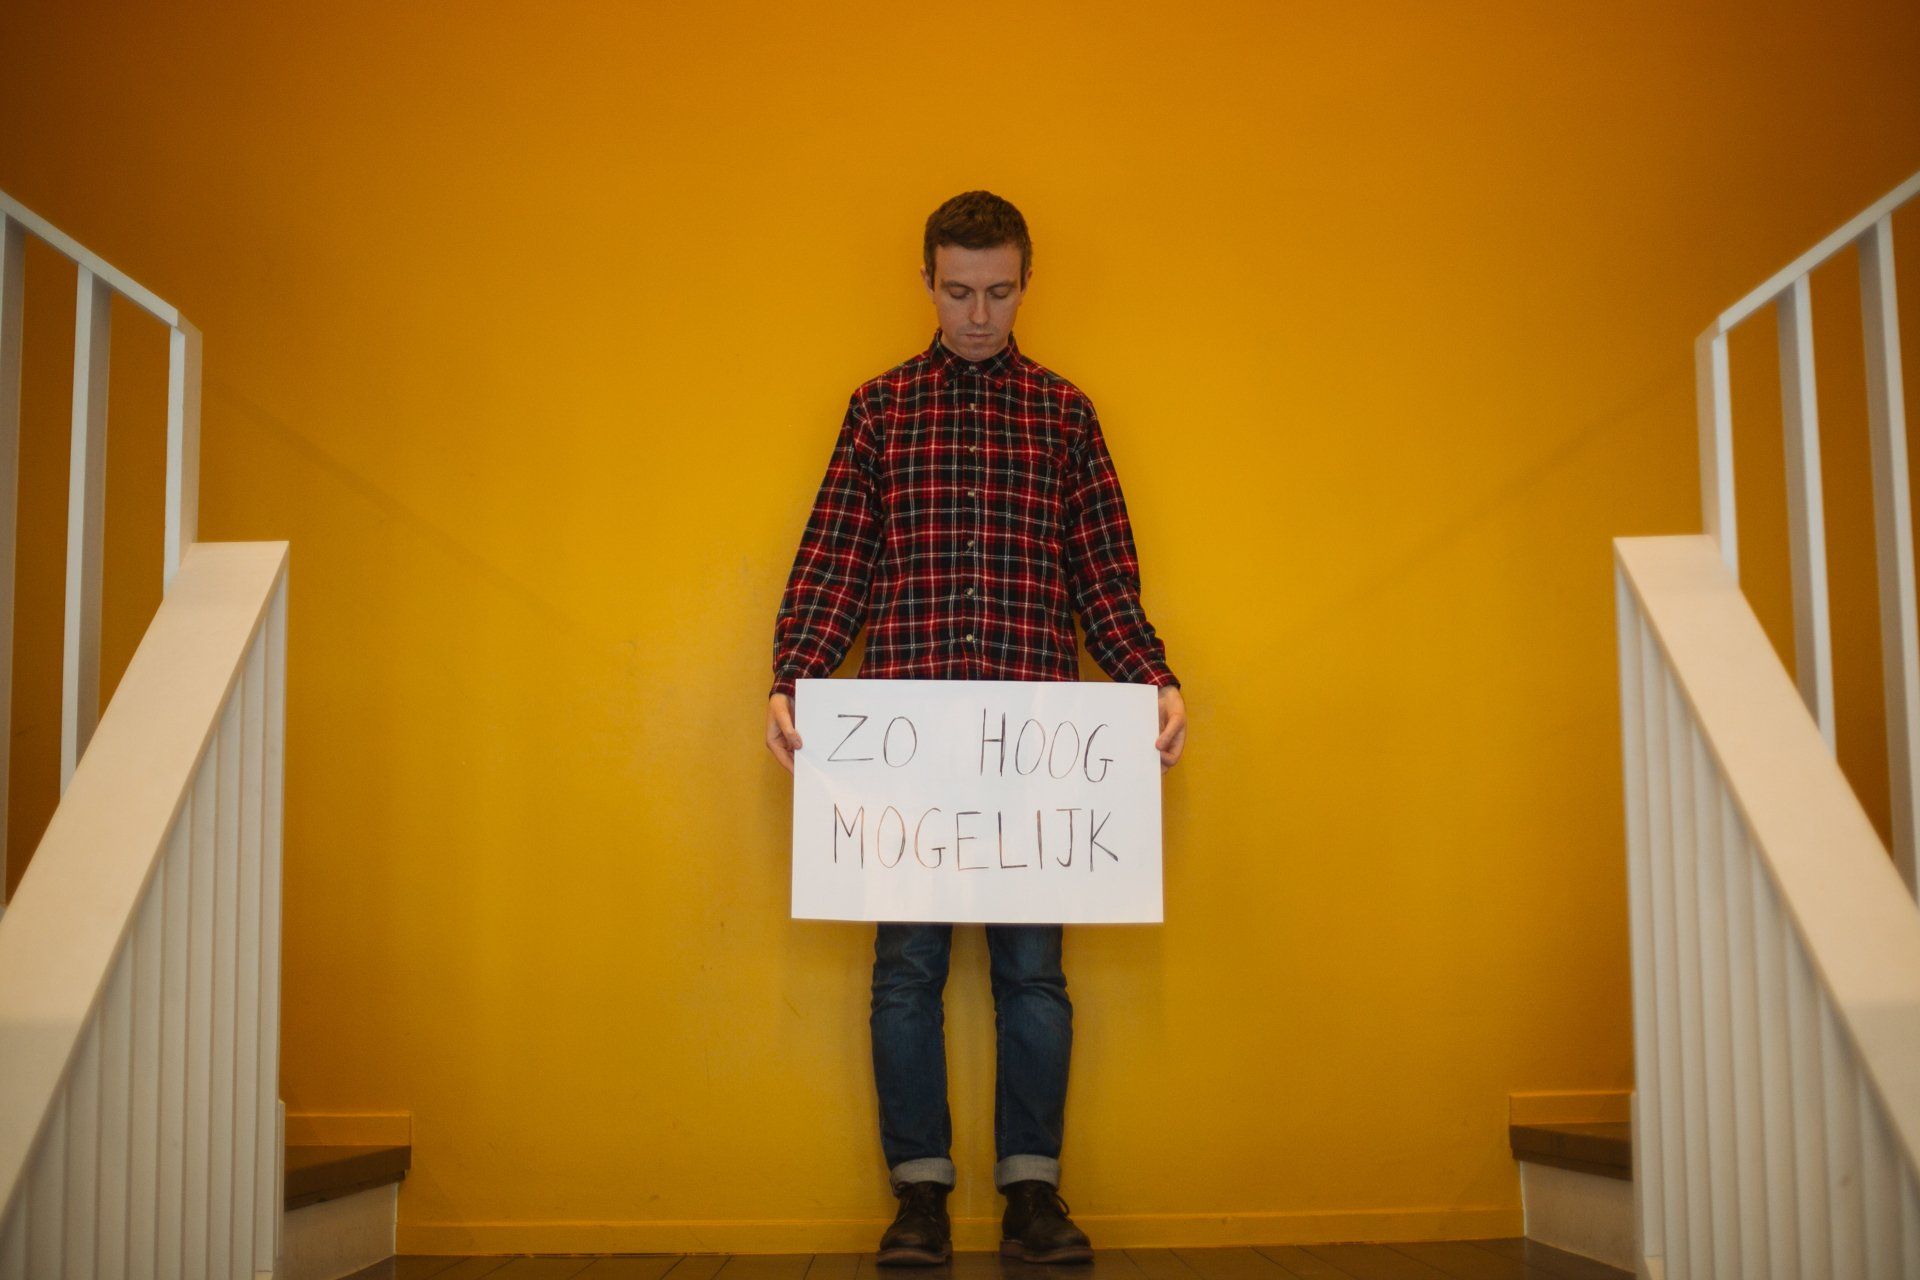 a man in a plaid shirt is holding a sign in front of a yellow wall .